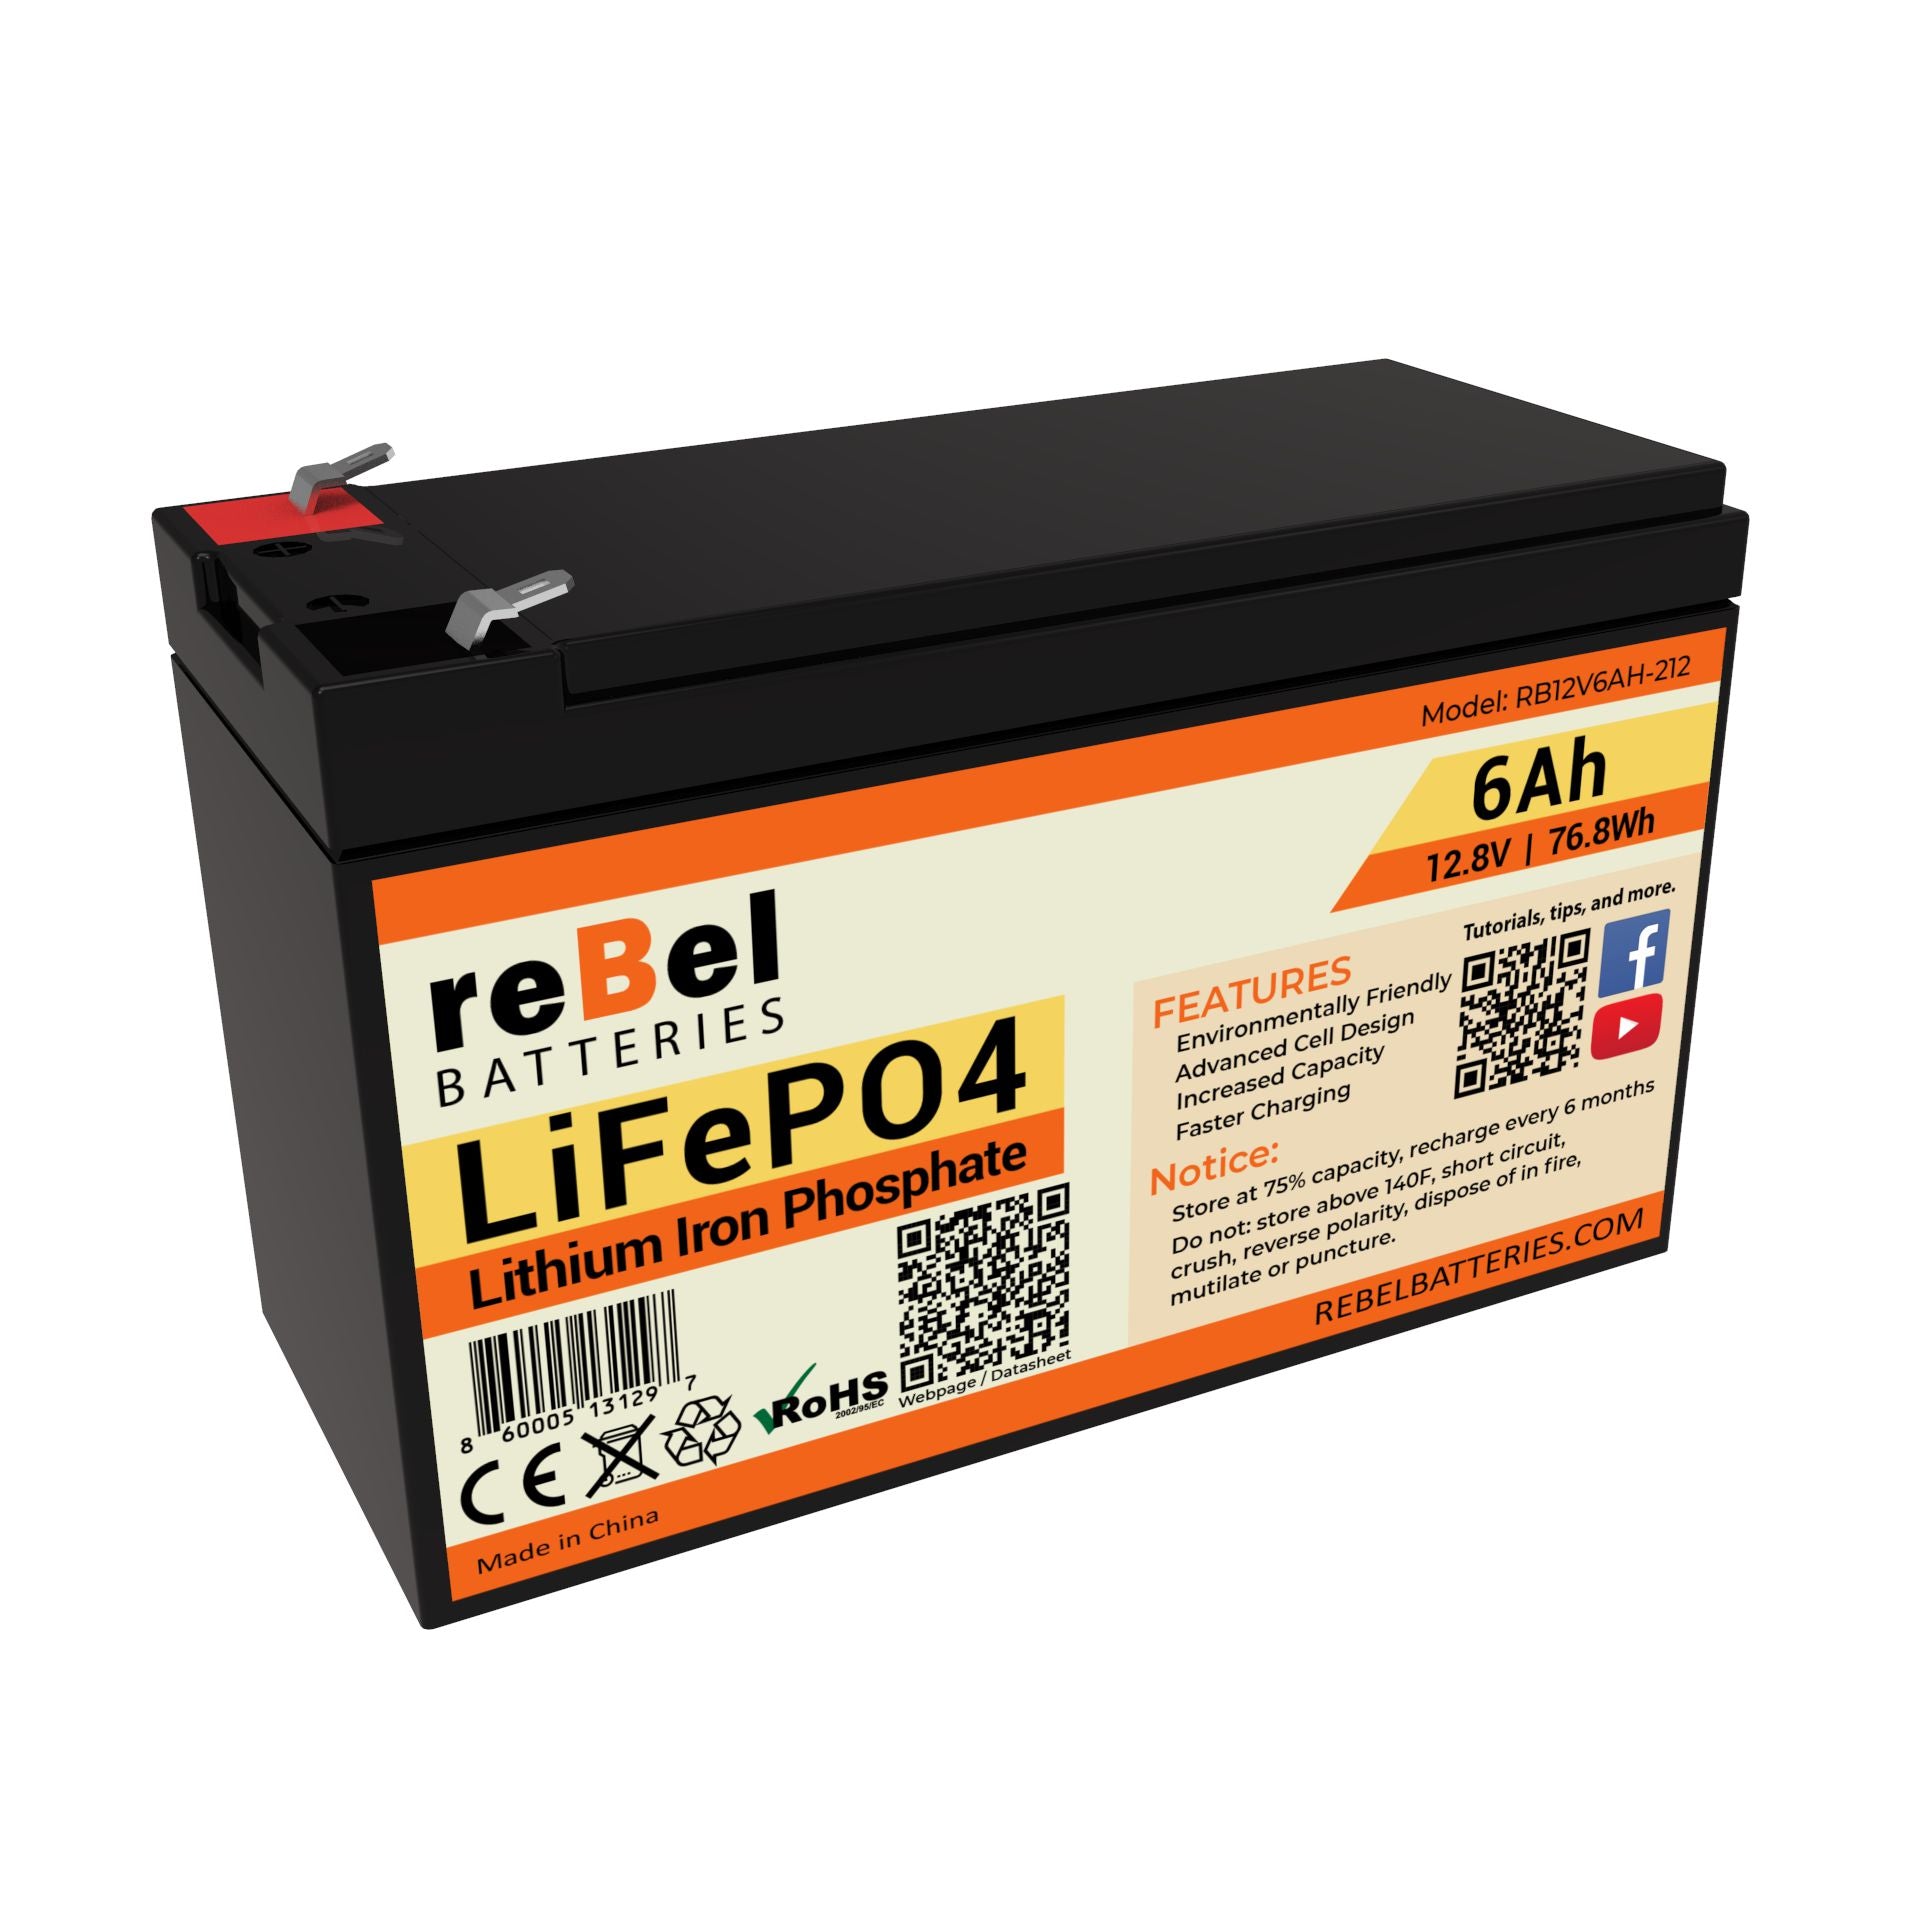 Review of the reBel 12V LiFePO4 - 6Ah Lithium Iron Phosphate Battery with LCD